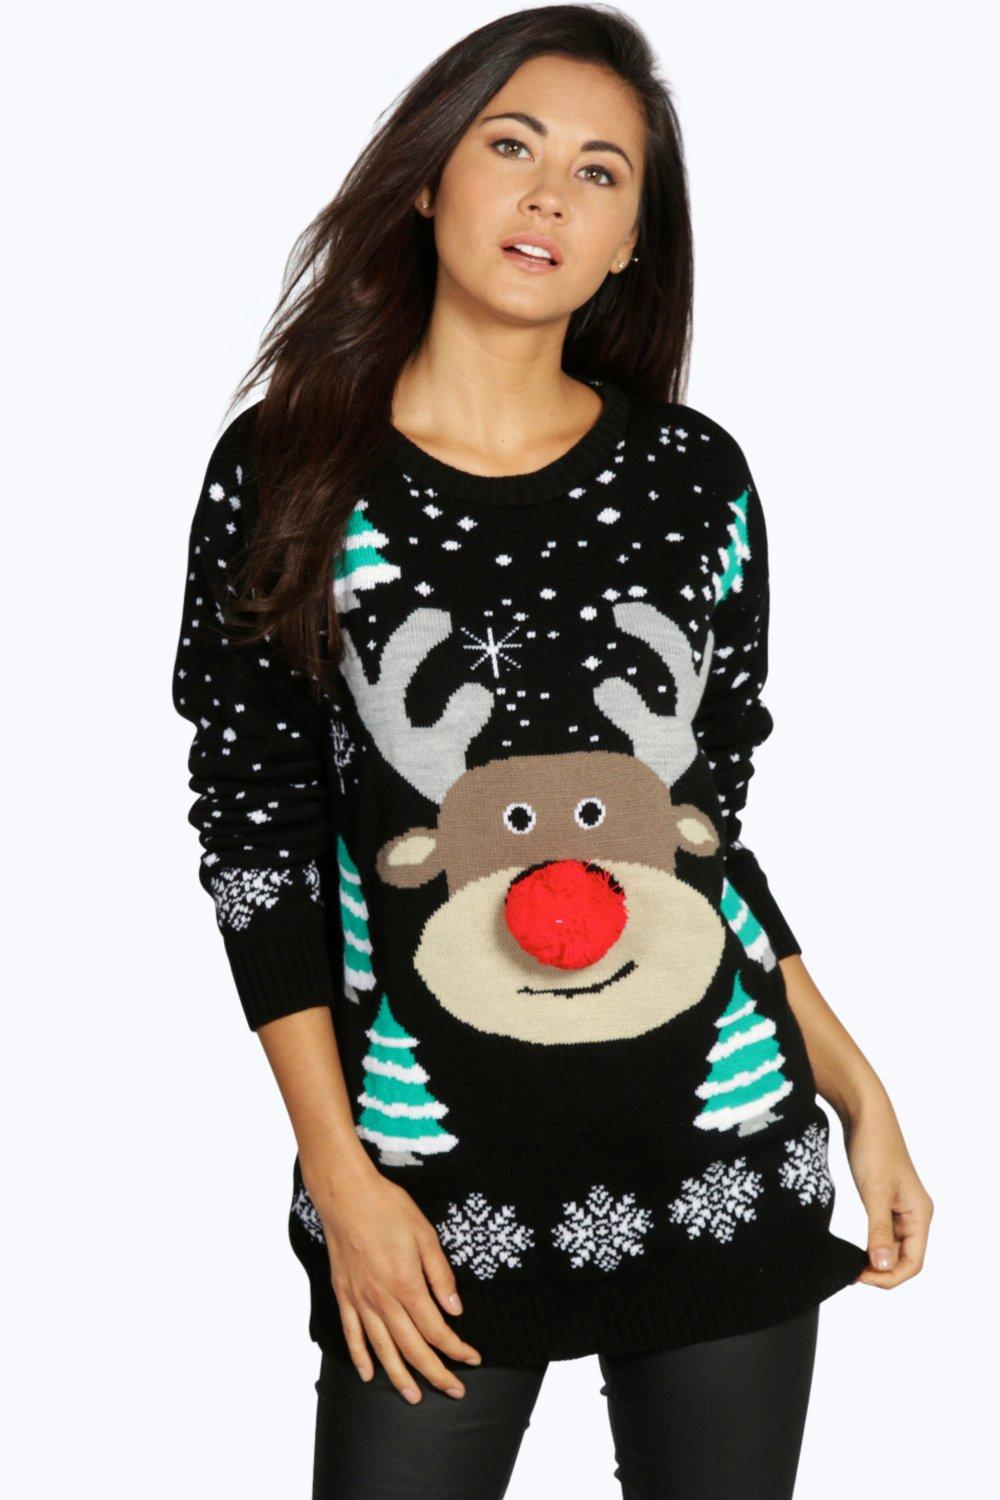 Boohoo Womens Christmas Jumper Sweater Xmas Gift In Multi Colours ...